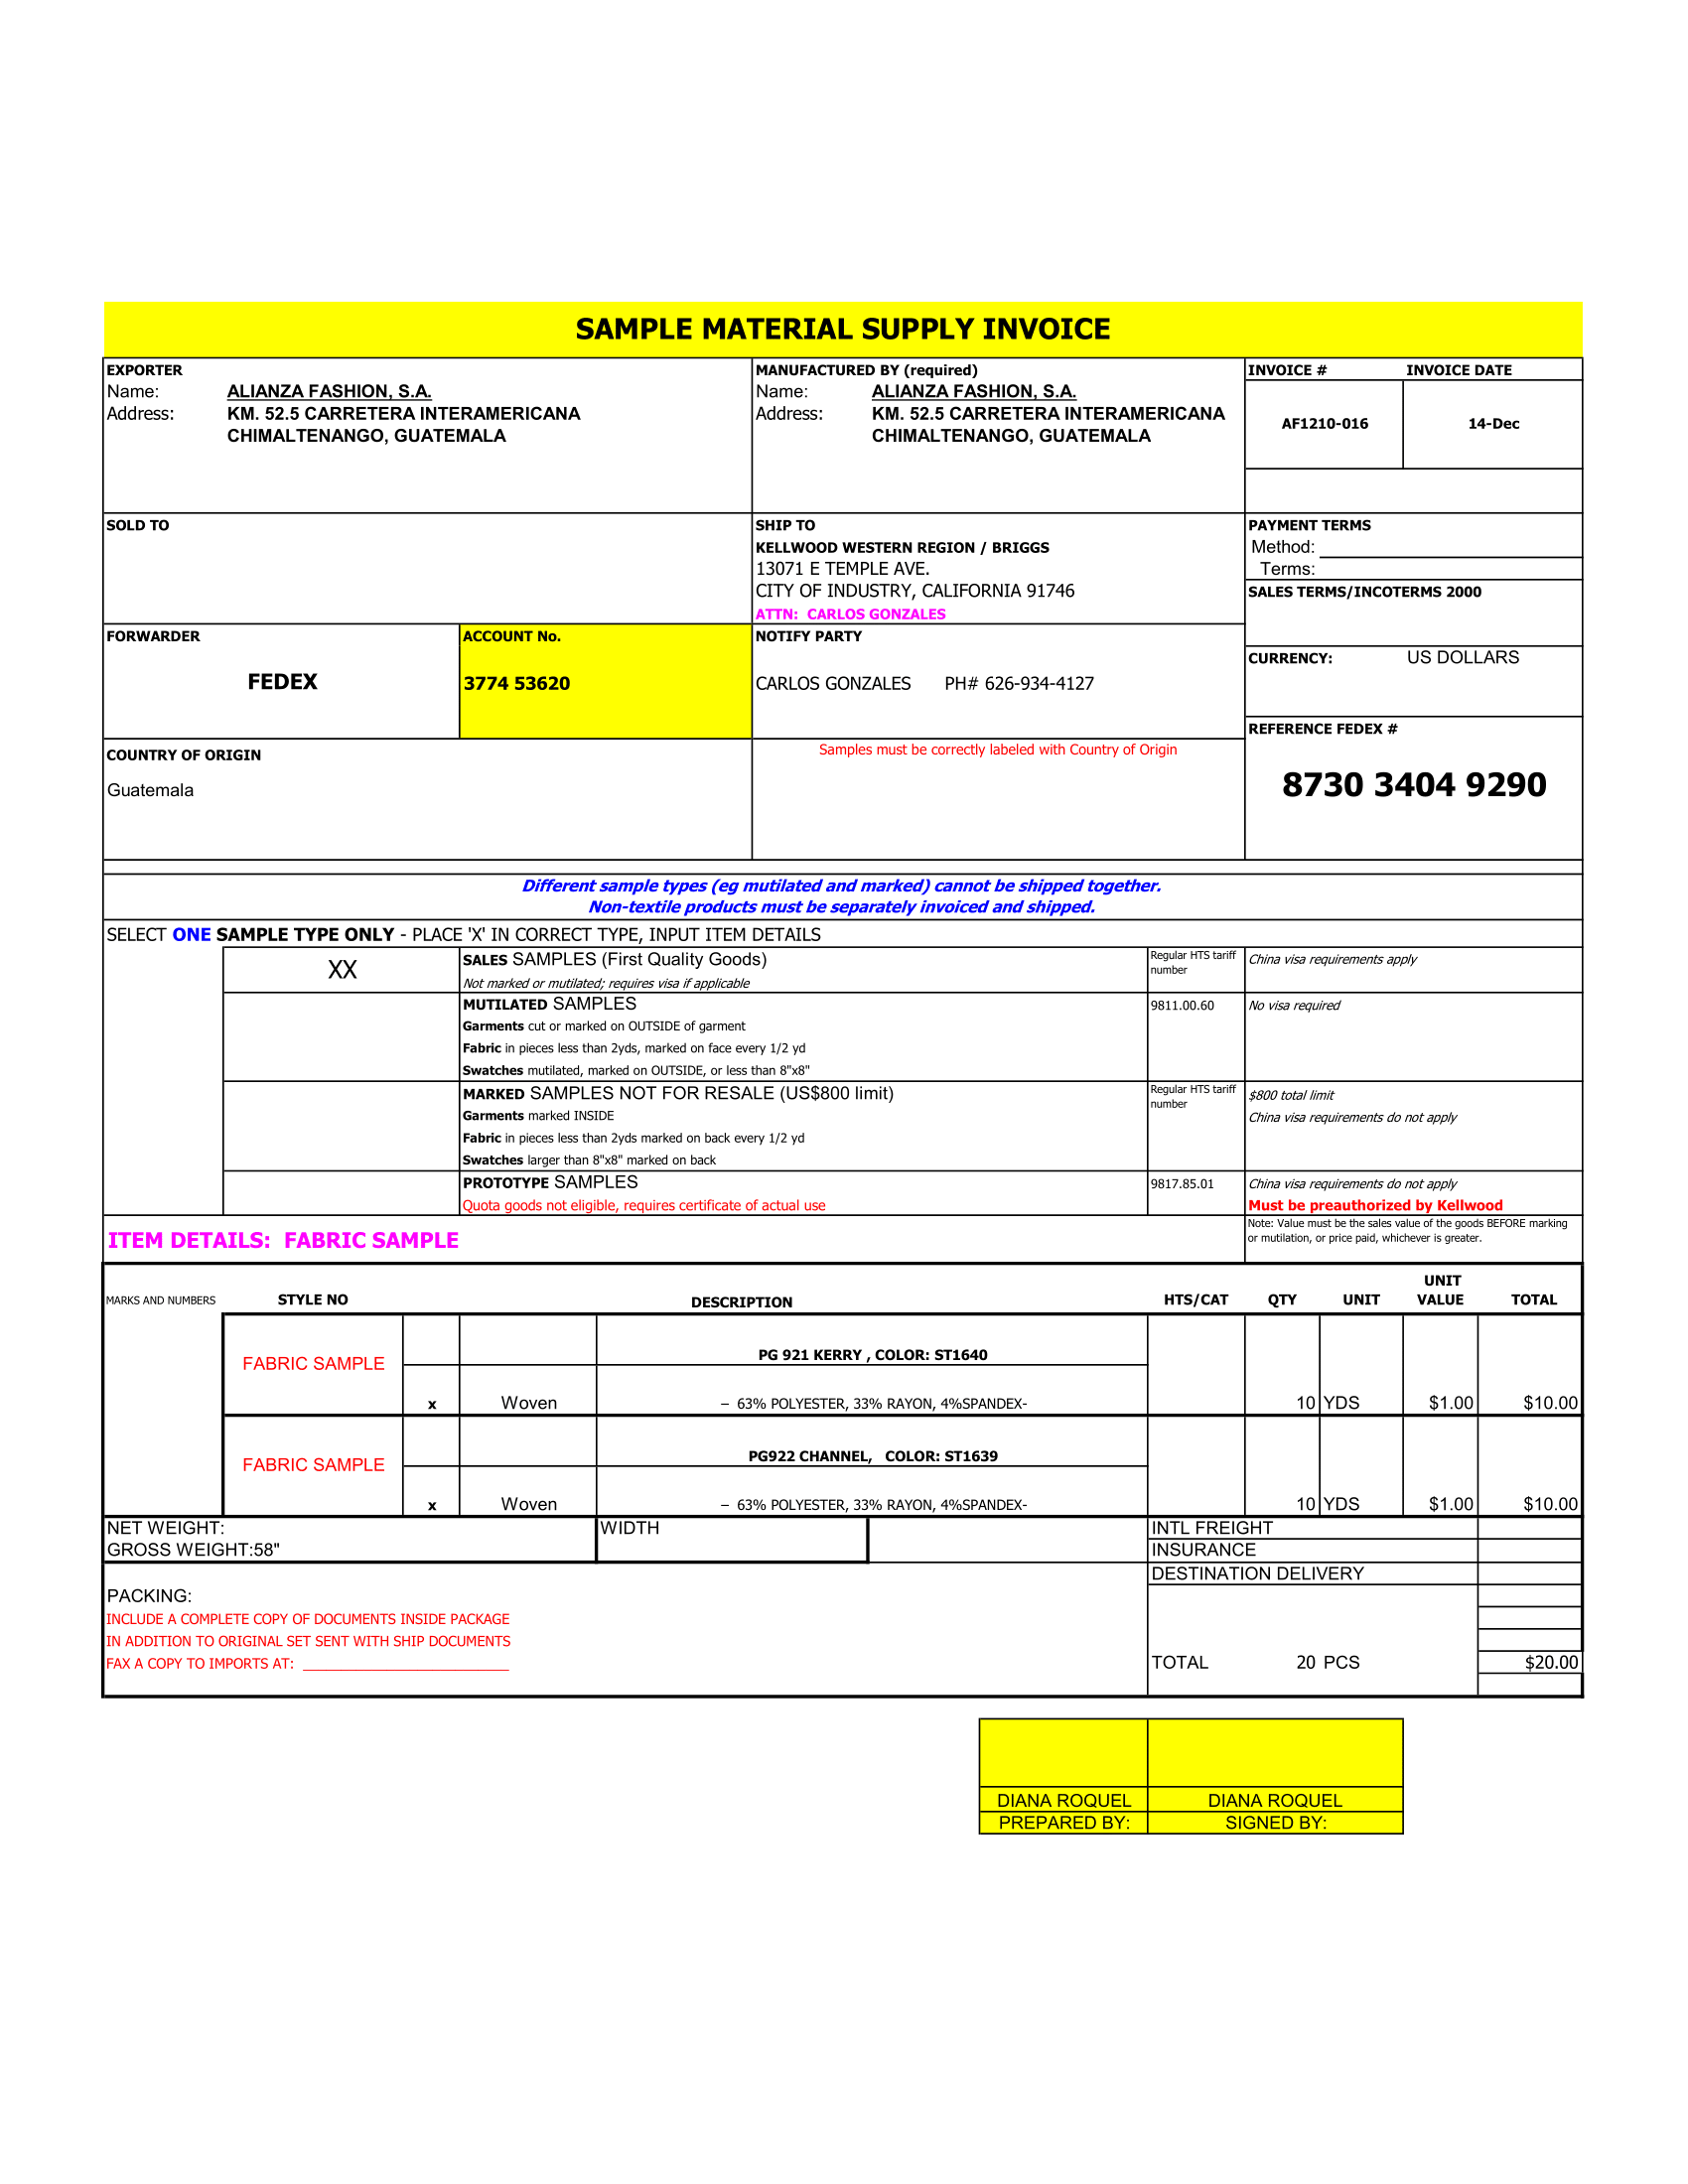 Sample Material Supply Invoice Template in Excel, Spreadsheet and Numbers